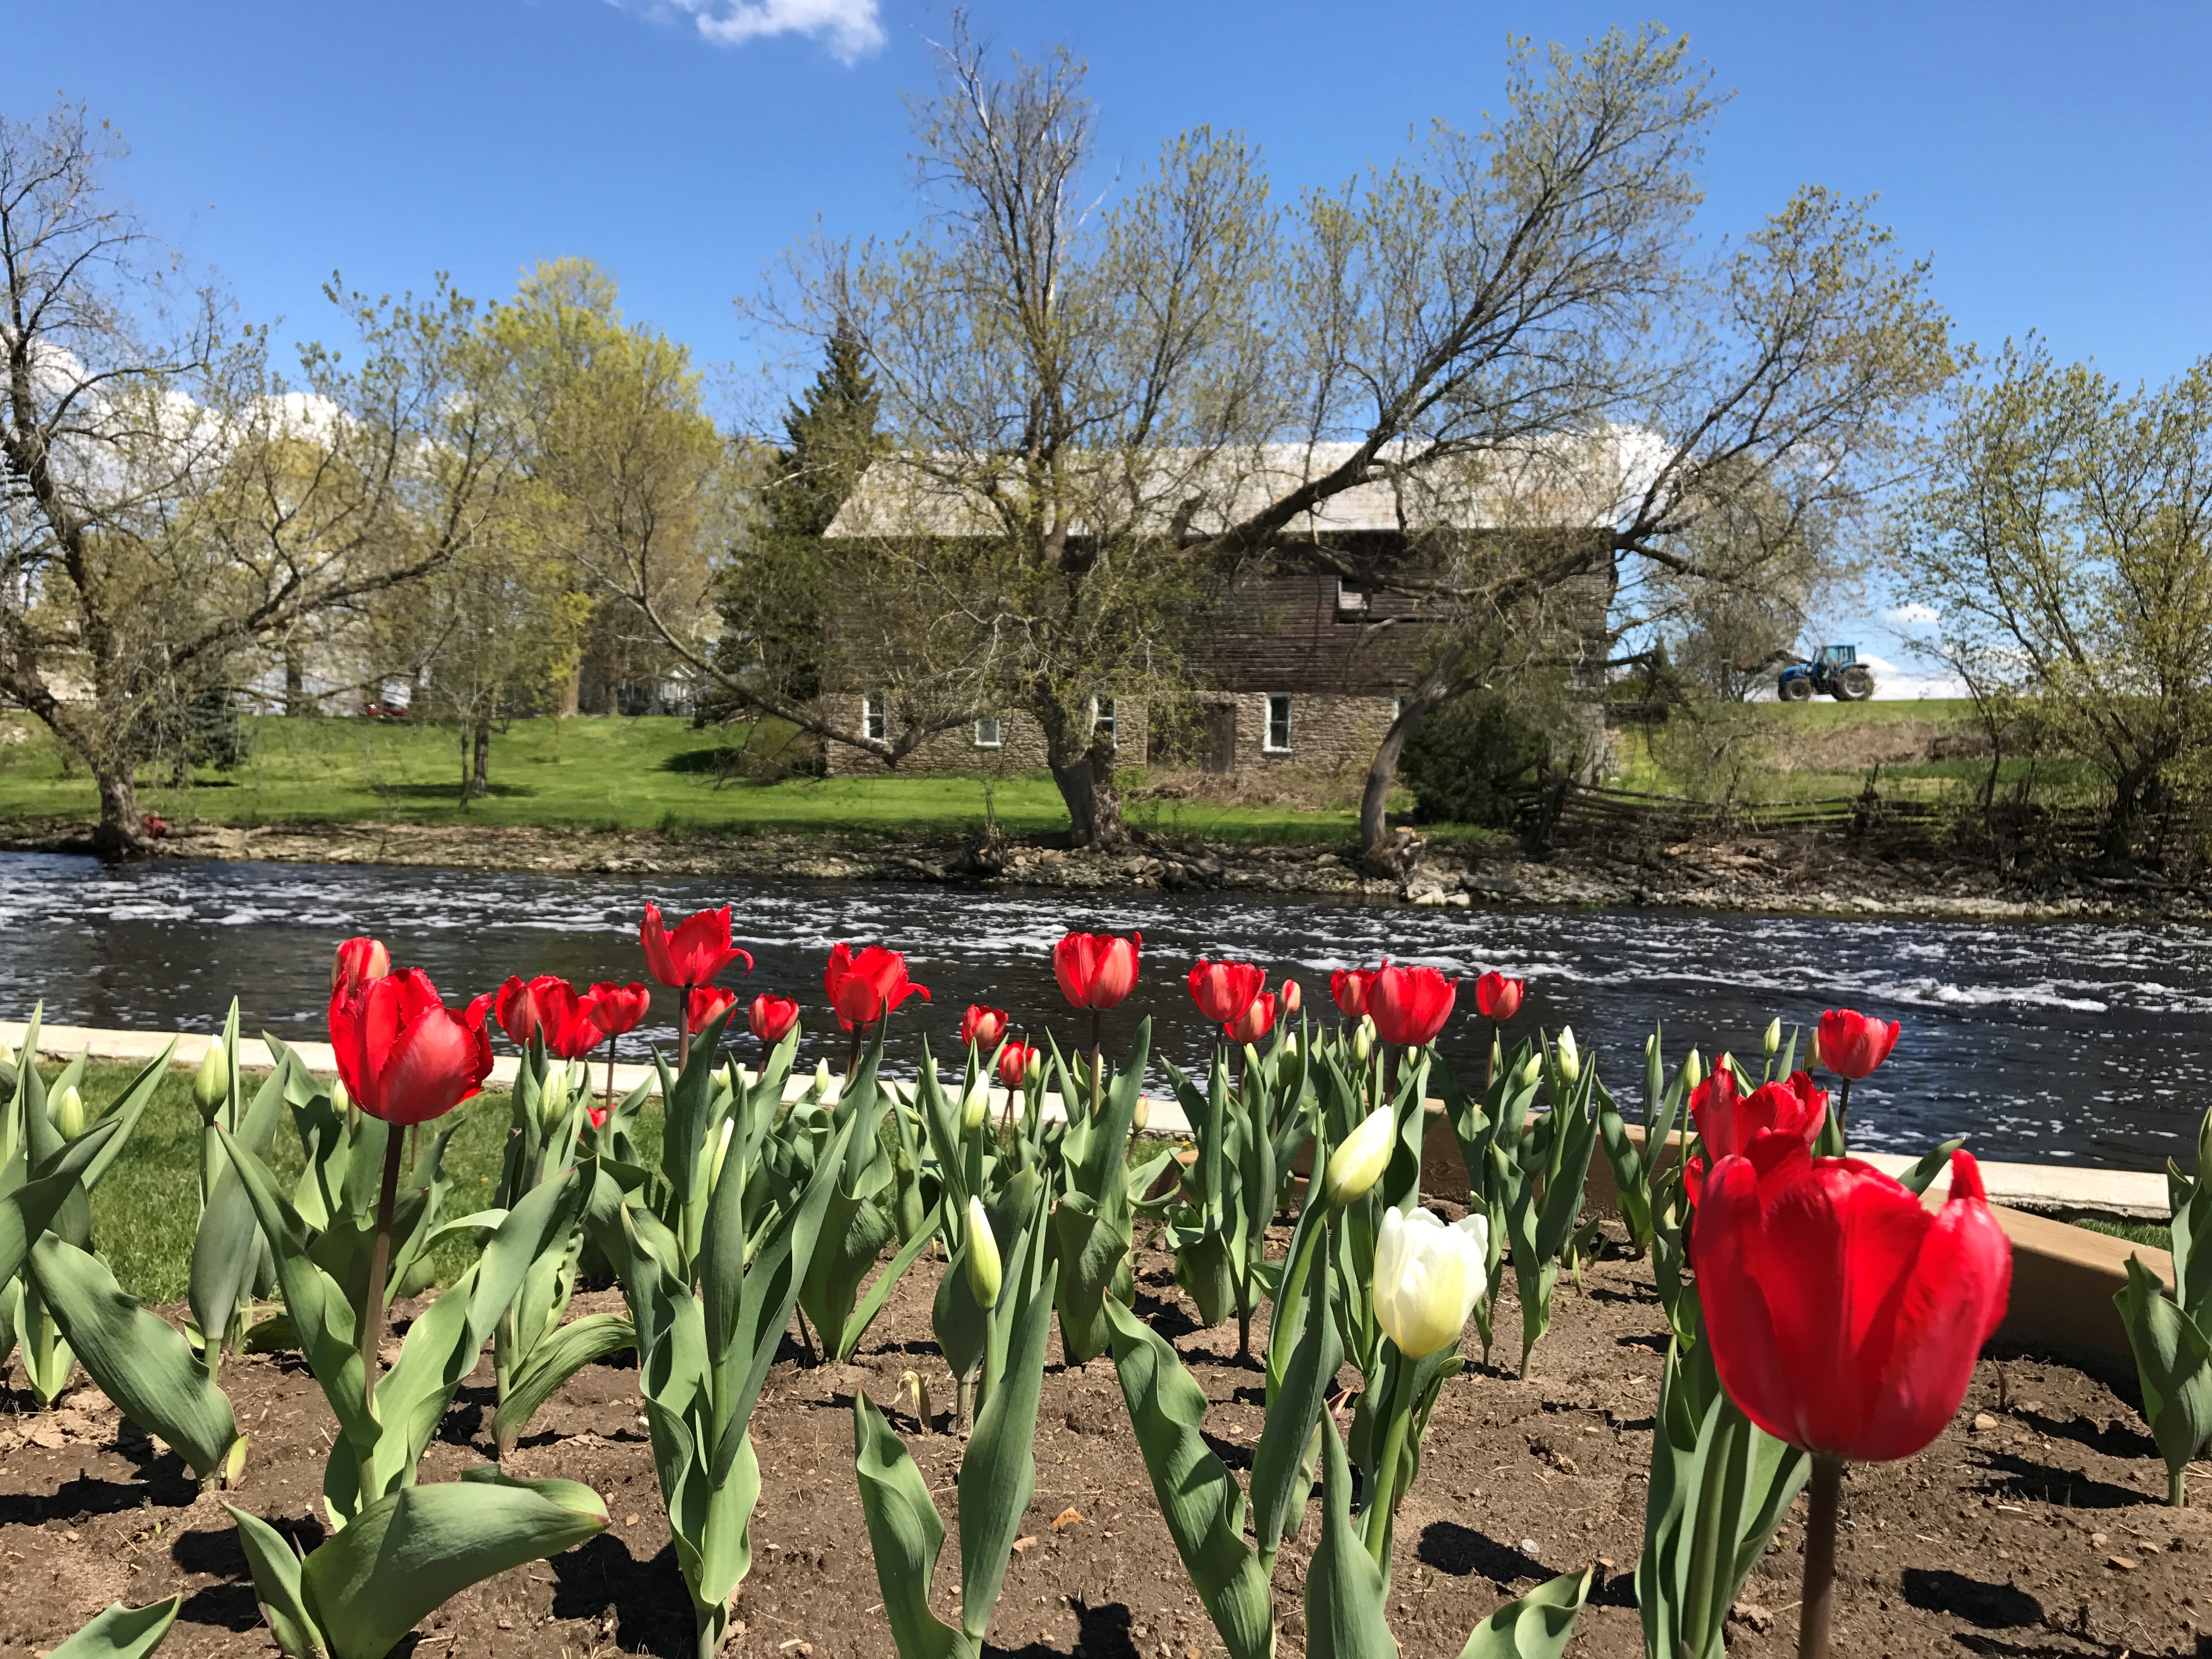 Tulips in bloom along the riverbank facing an old heritage building